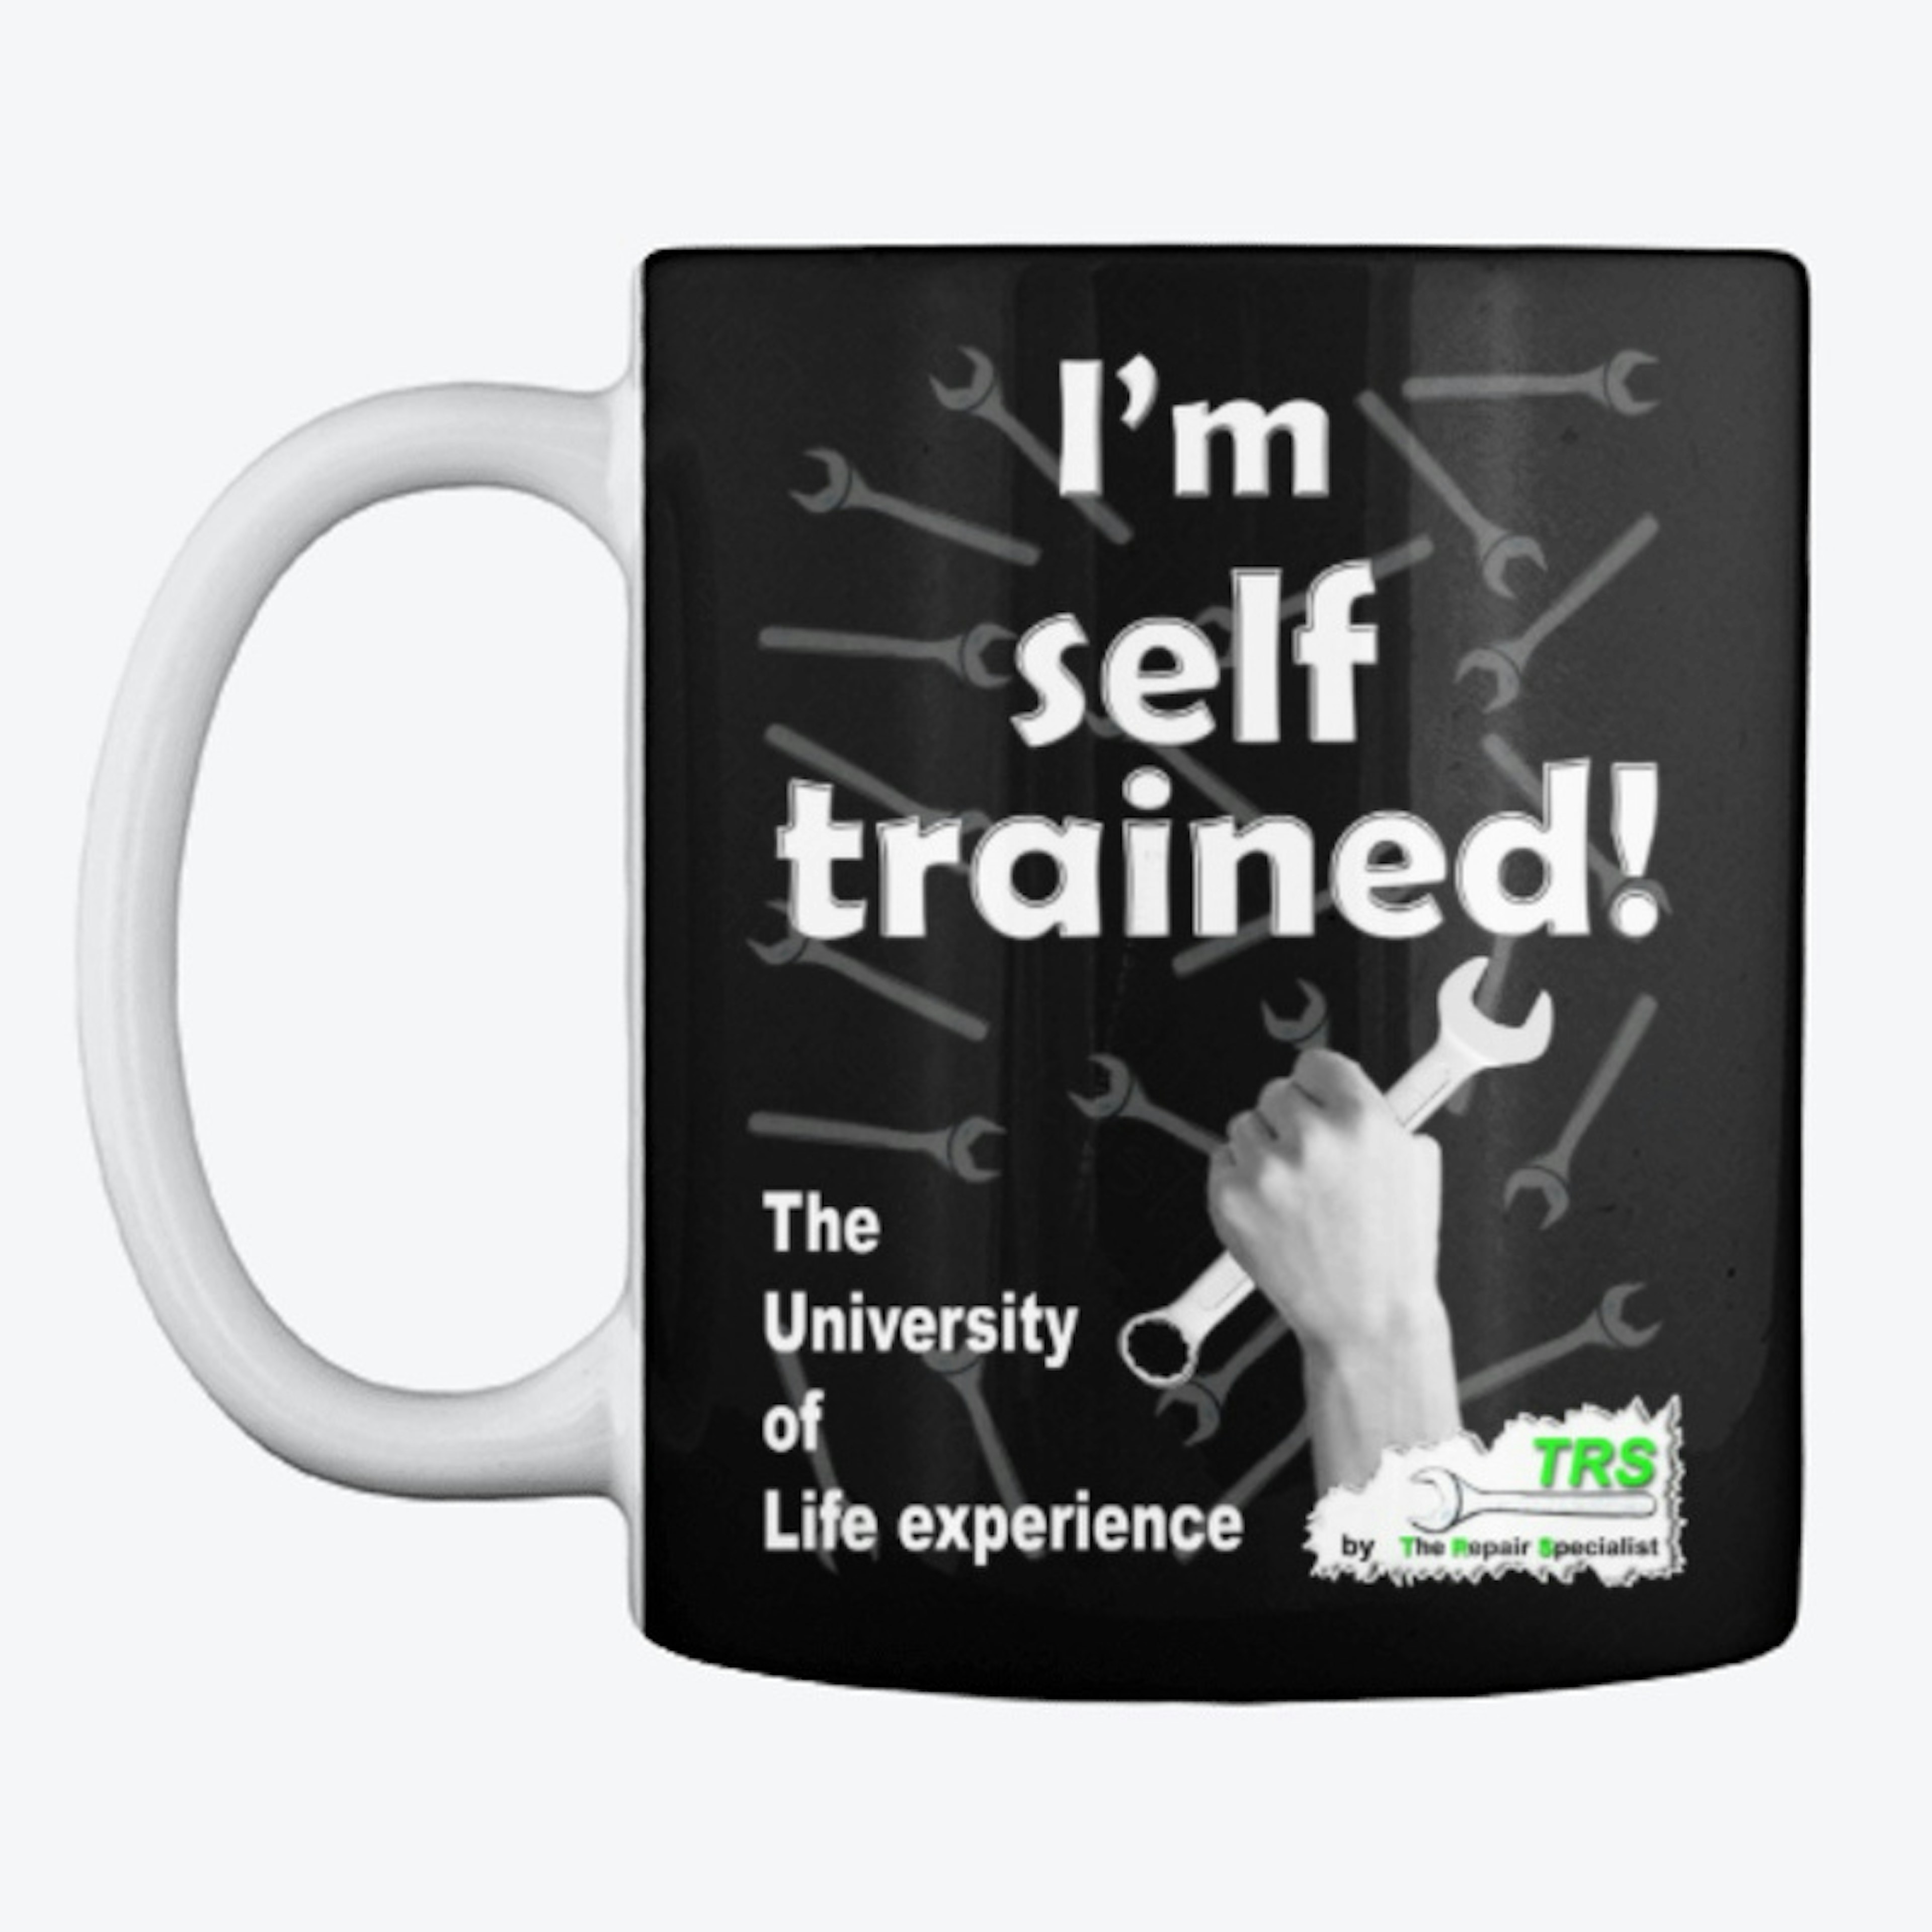 Self Trained. The University of Life